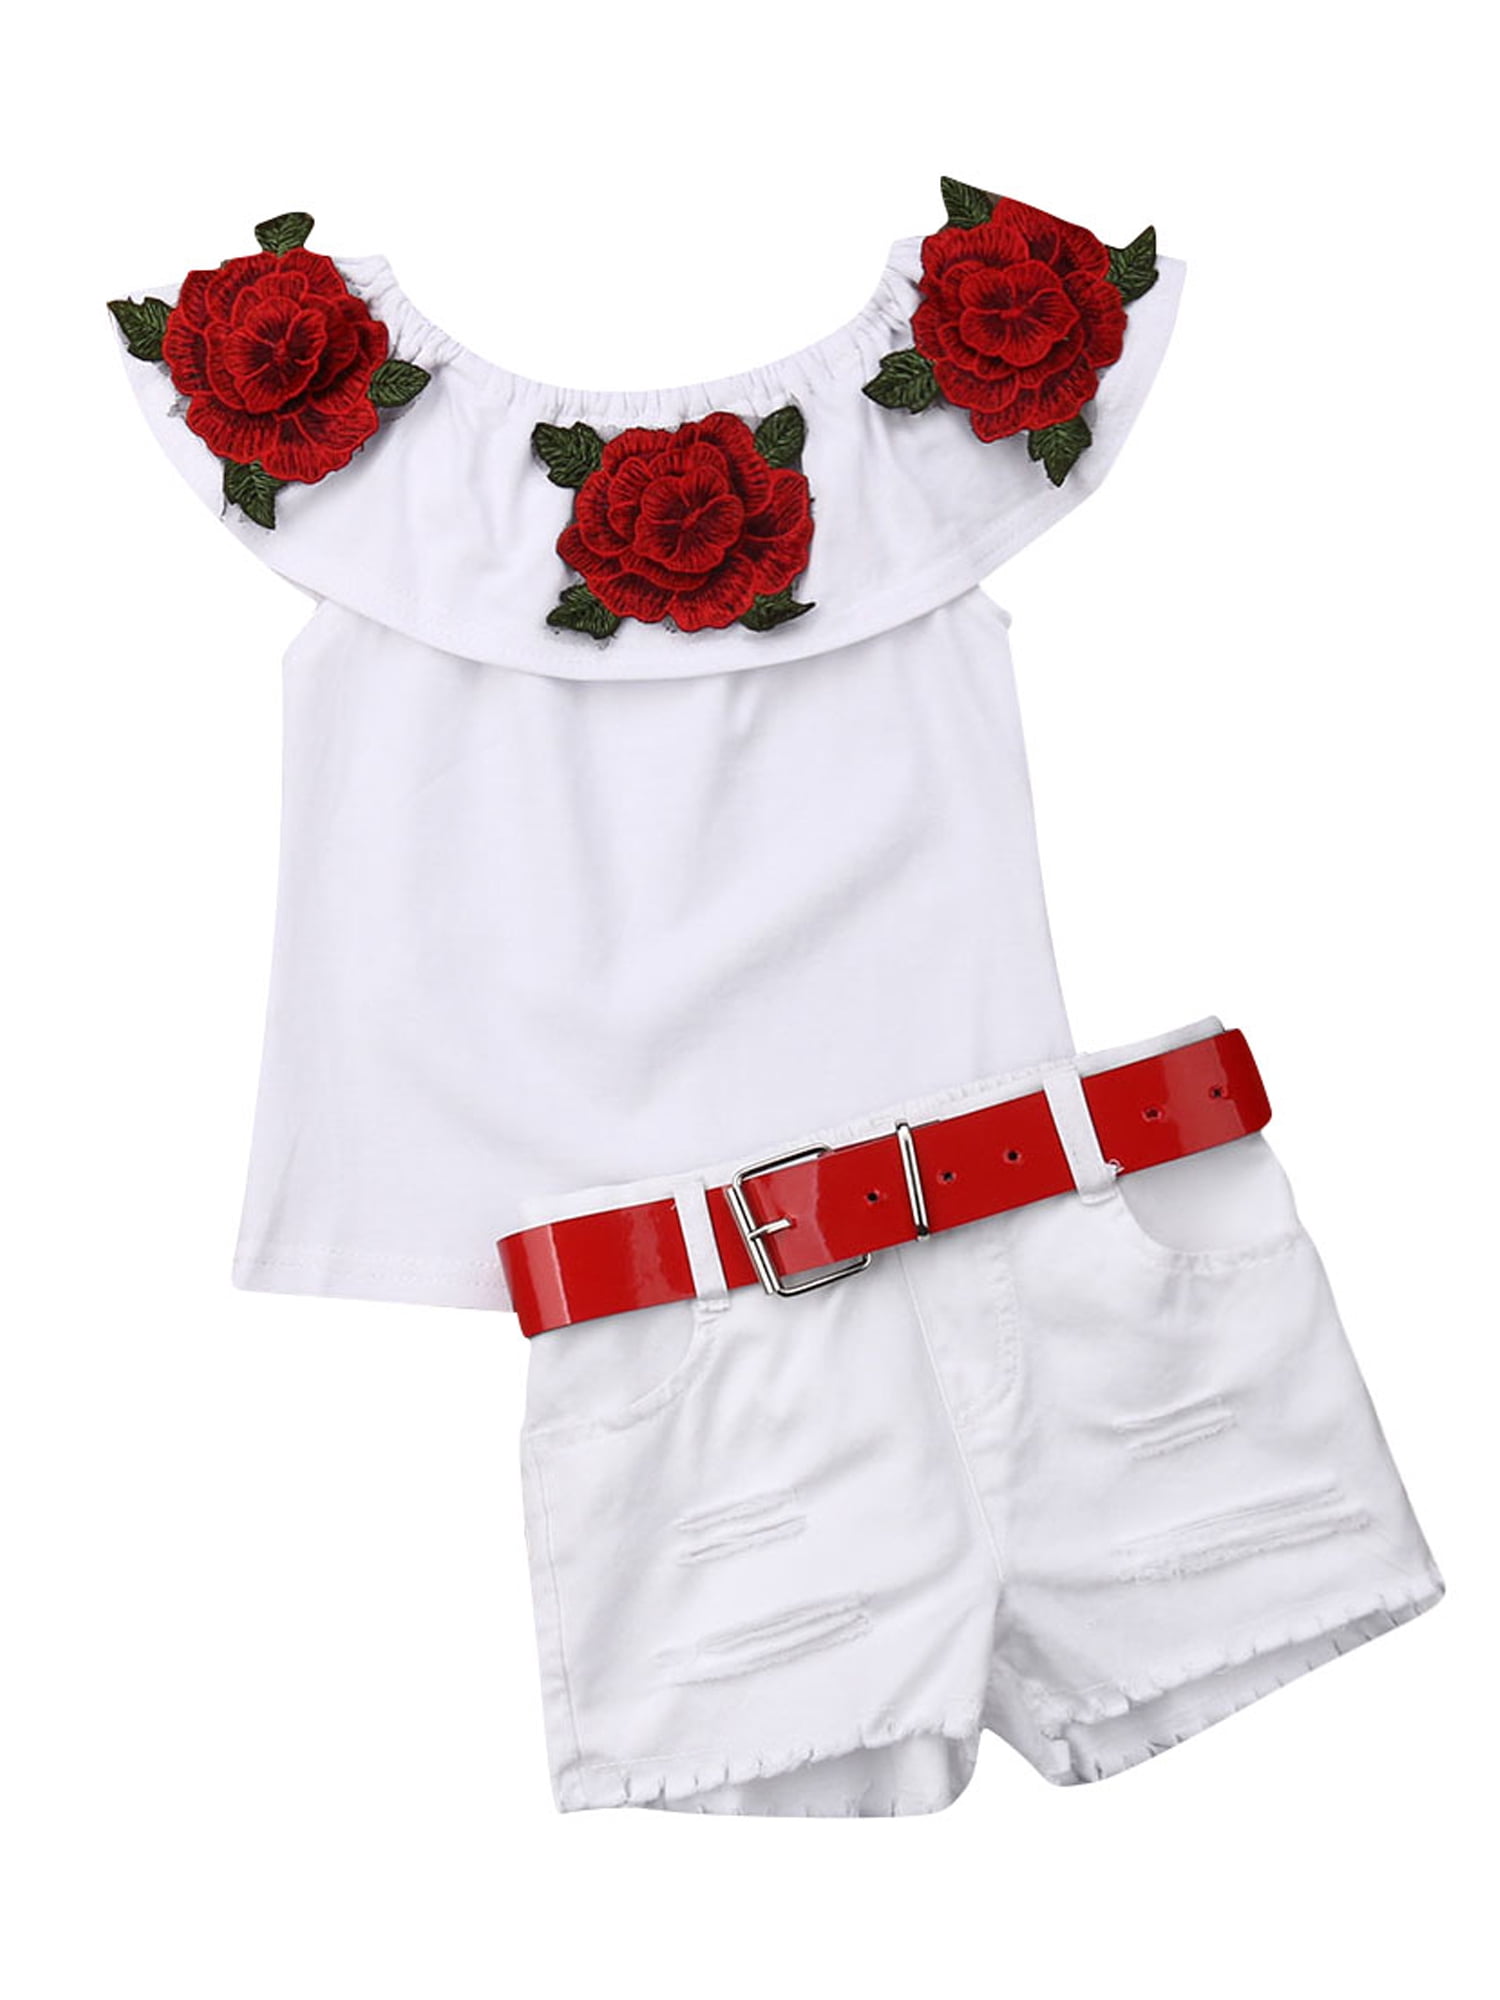 Toddler Baby Girl Summer Outfits Off Shoulder Shirt Top and Floral Belted Shorts Clothing Set